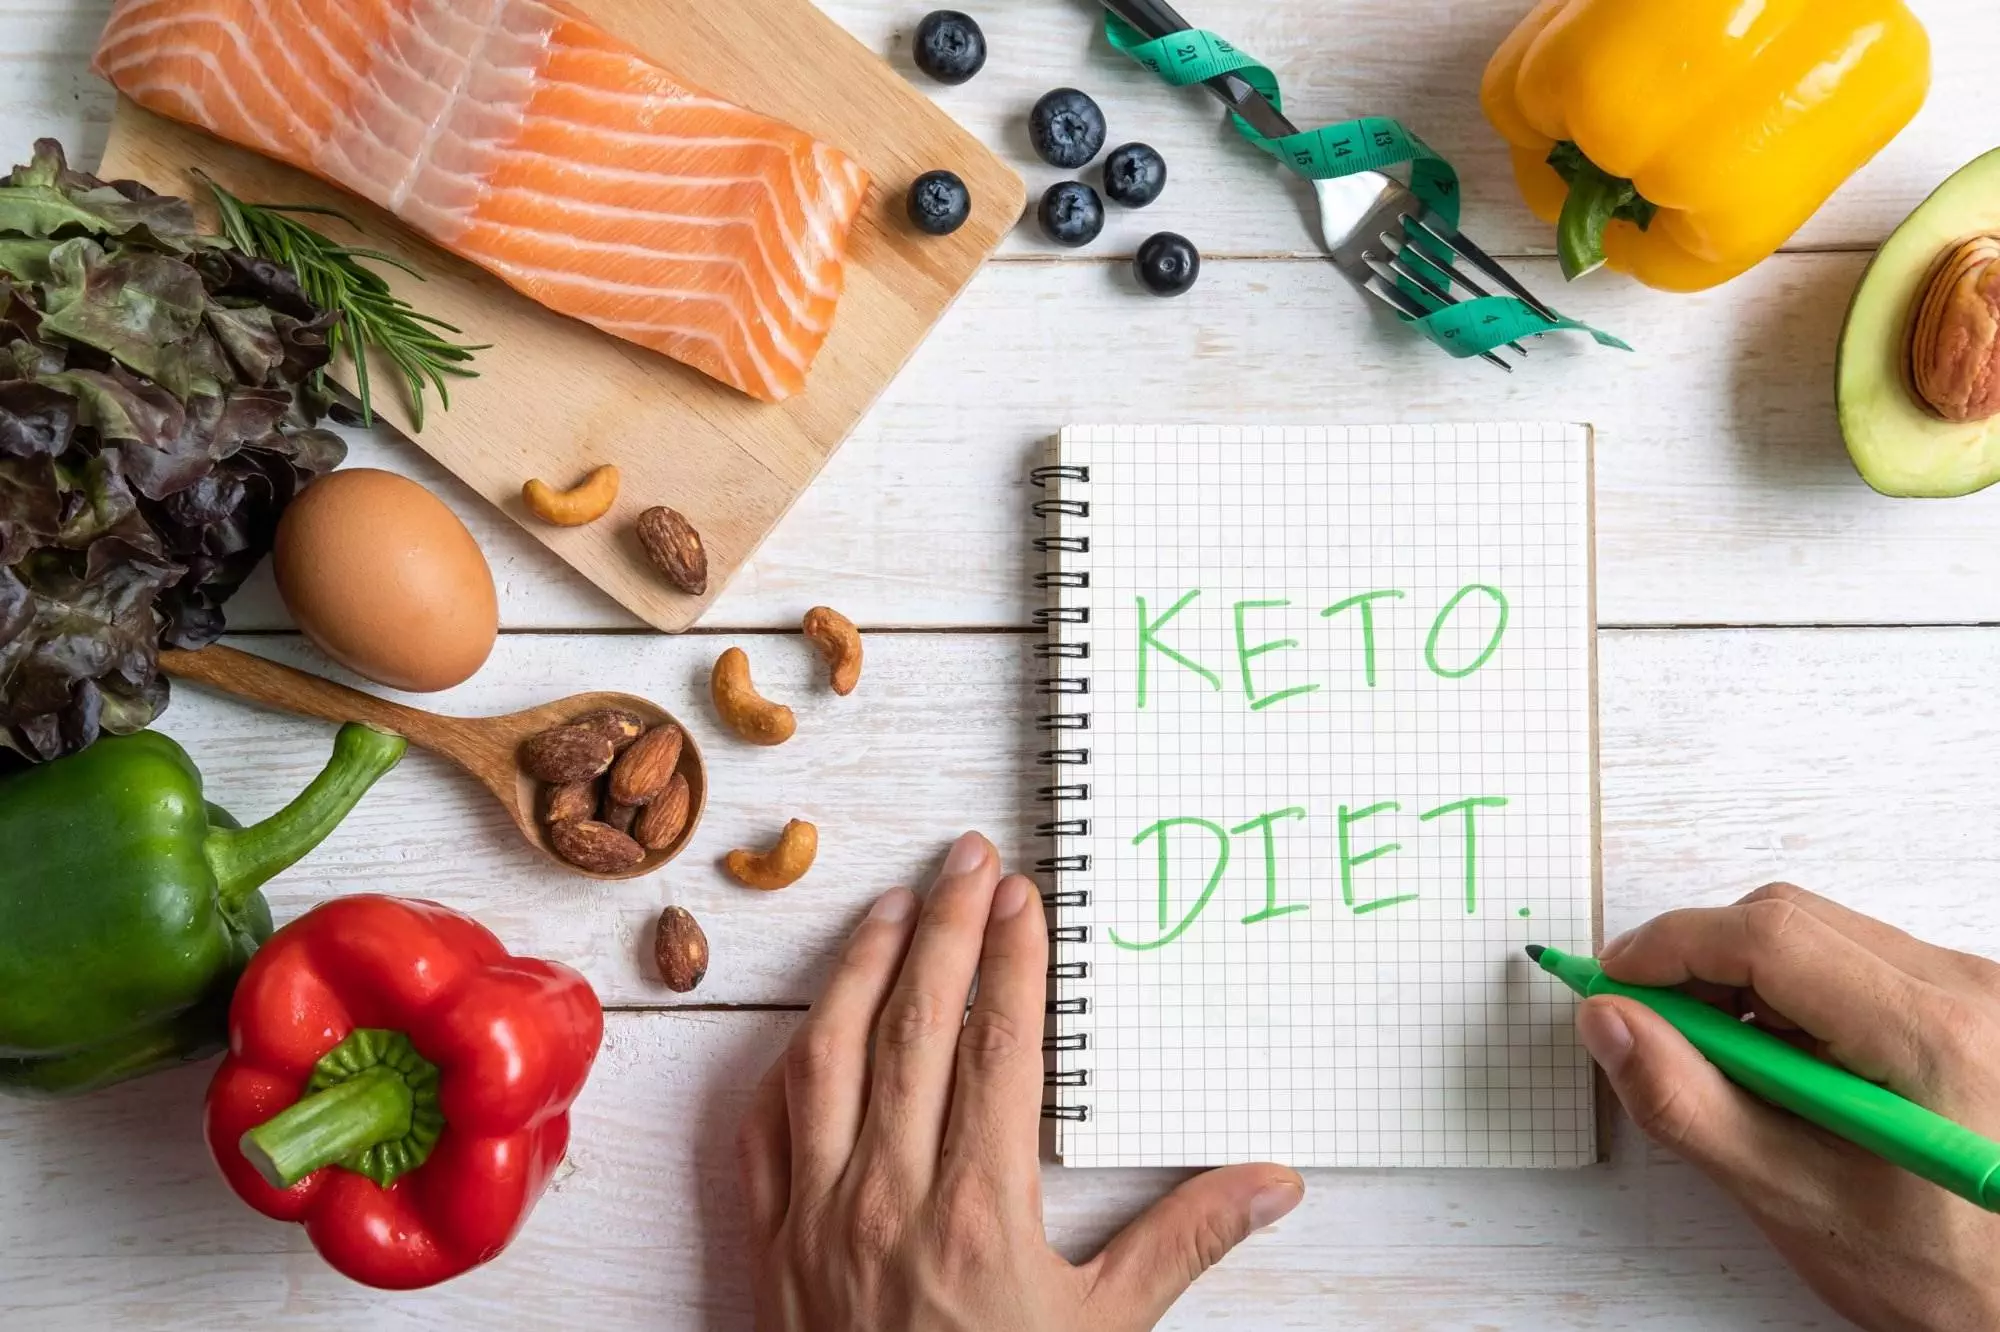 Keto diet planning with healthy foods and notebook.